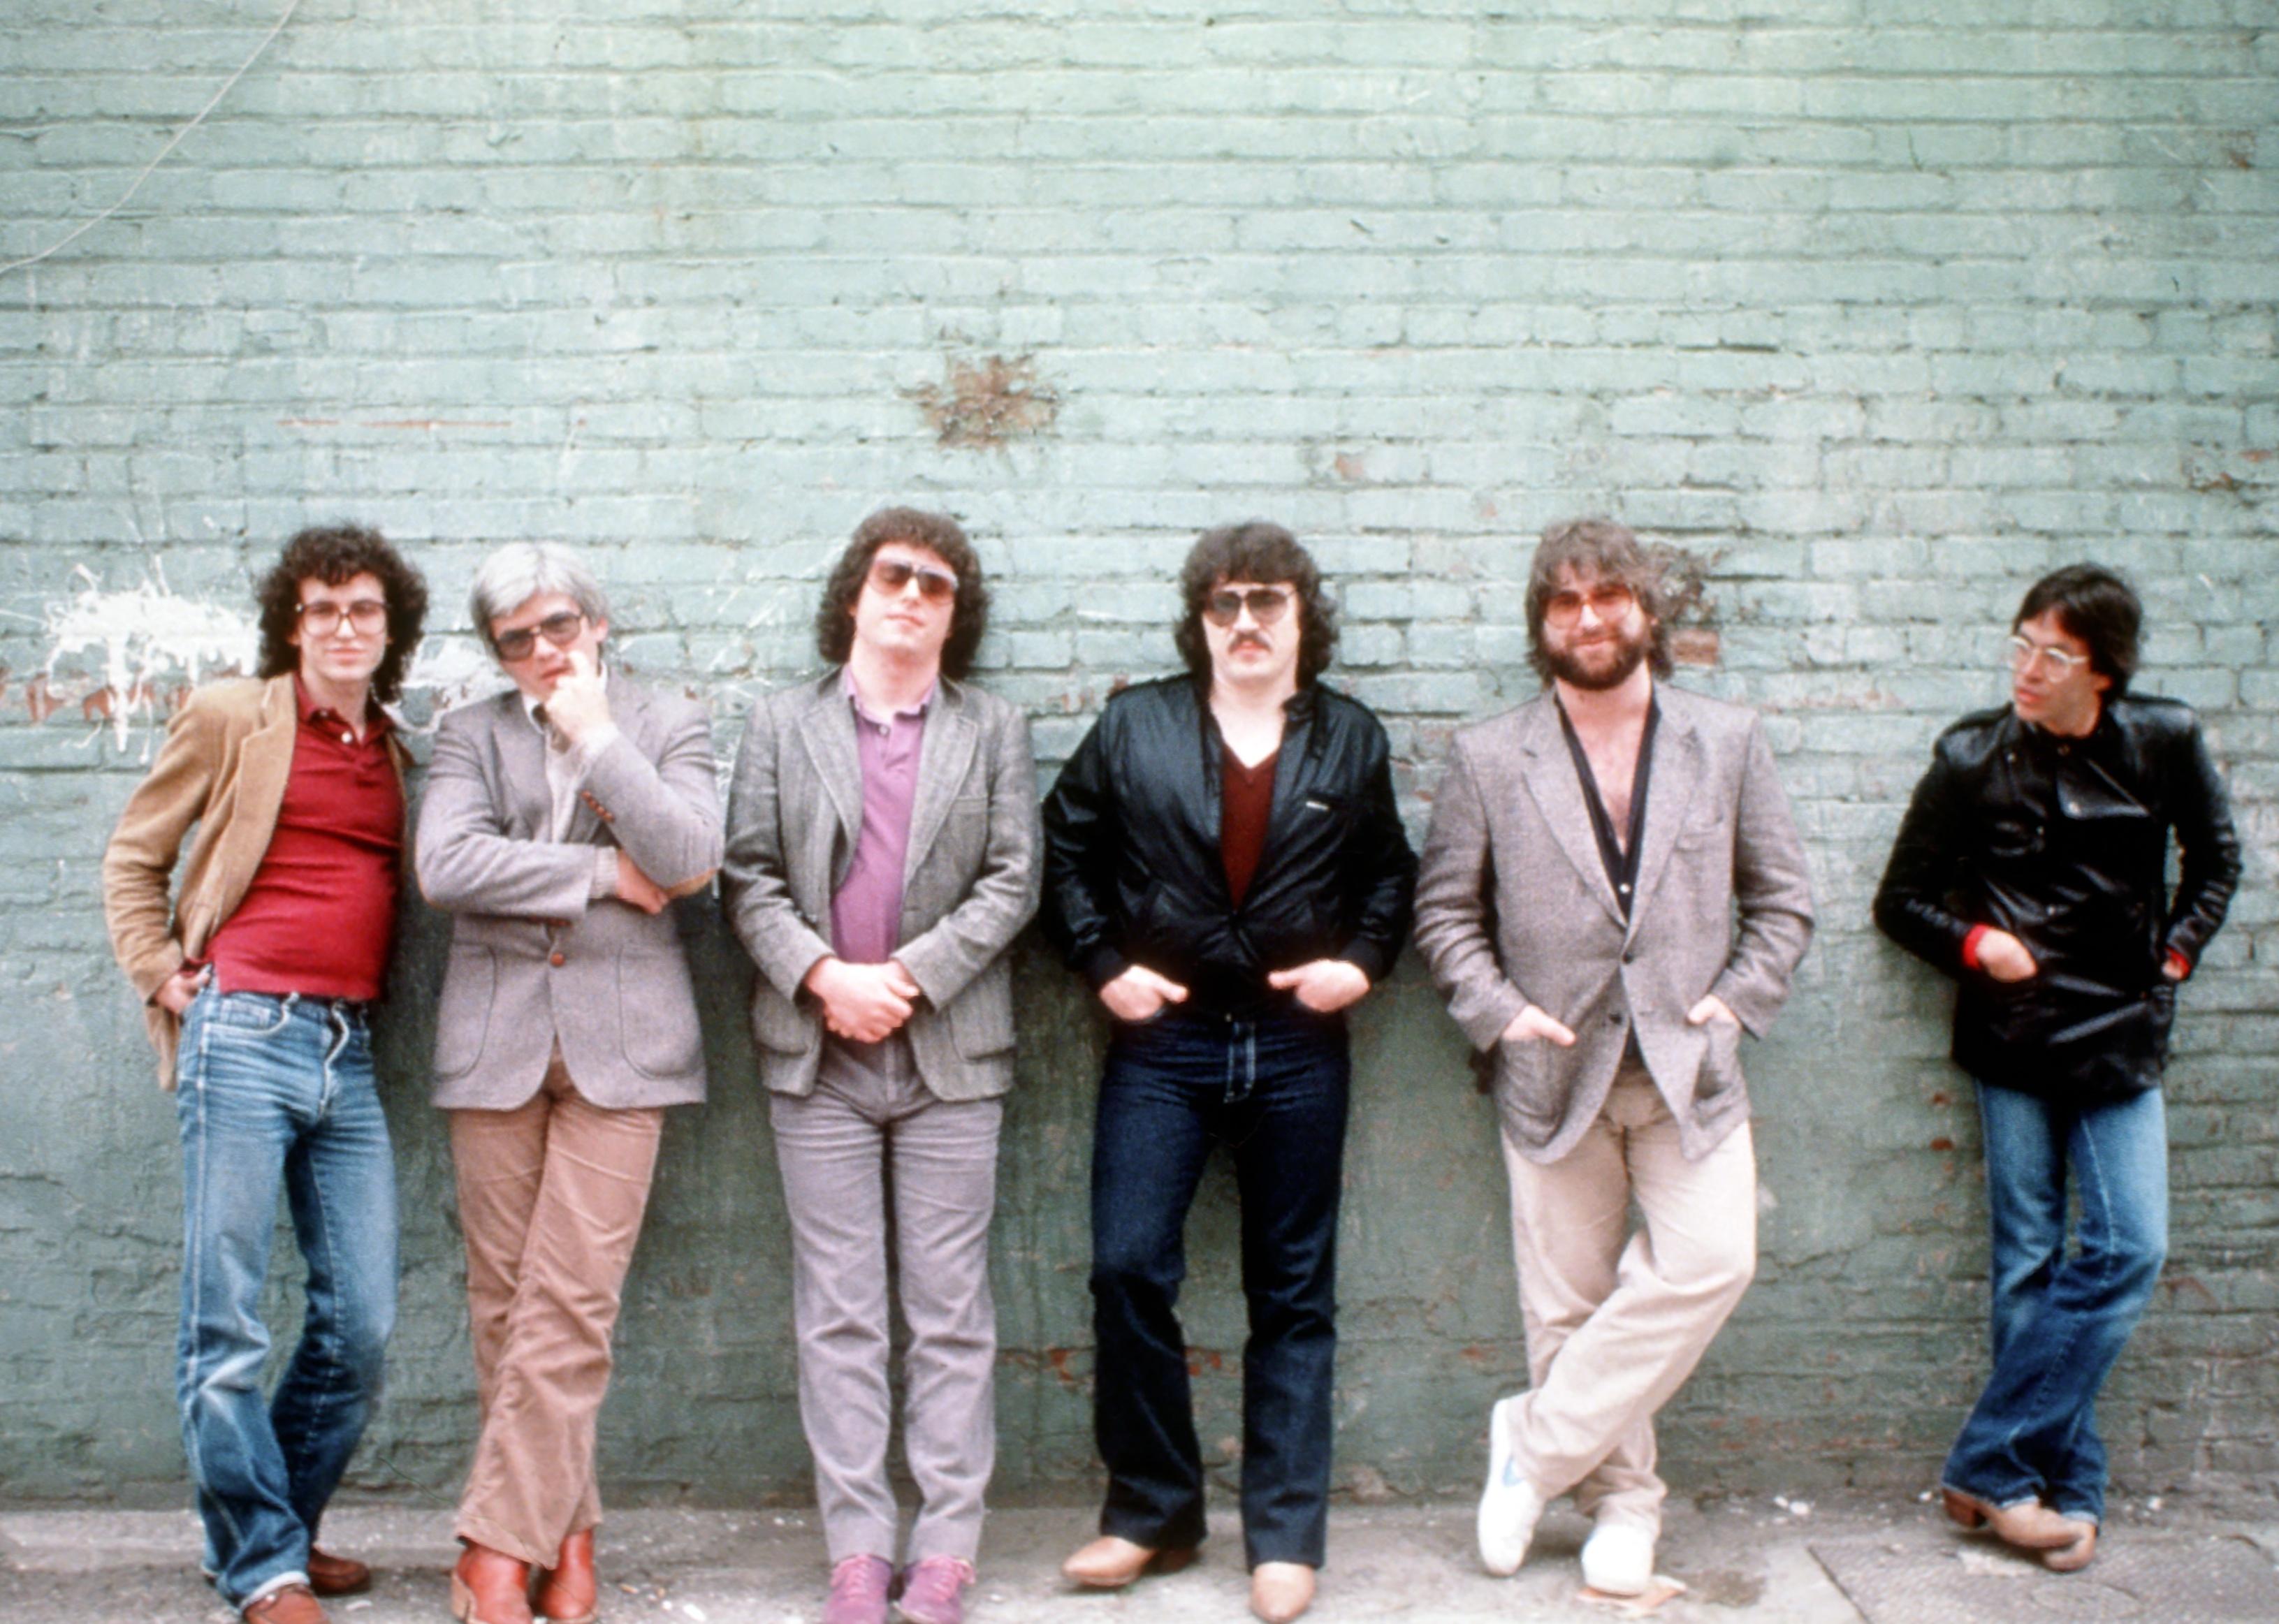 Rock group Toto pose for a portrait in May 1982.